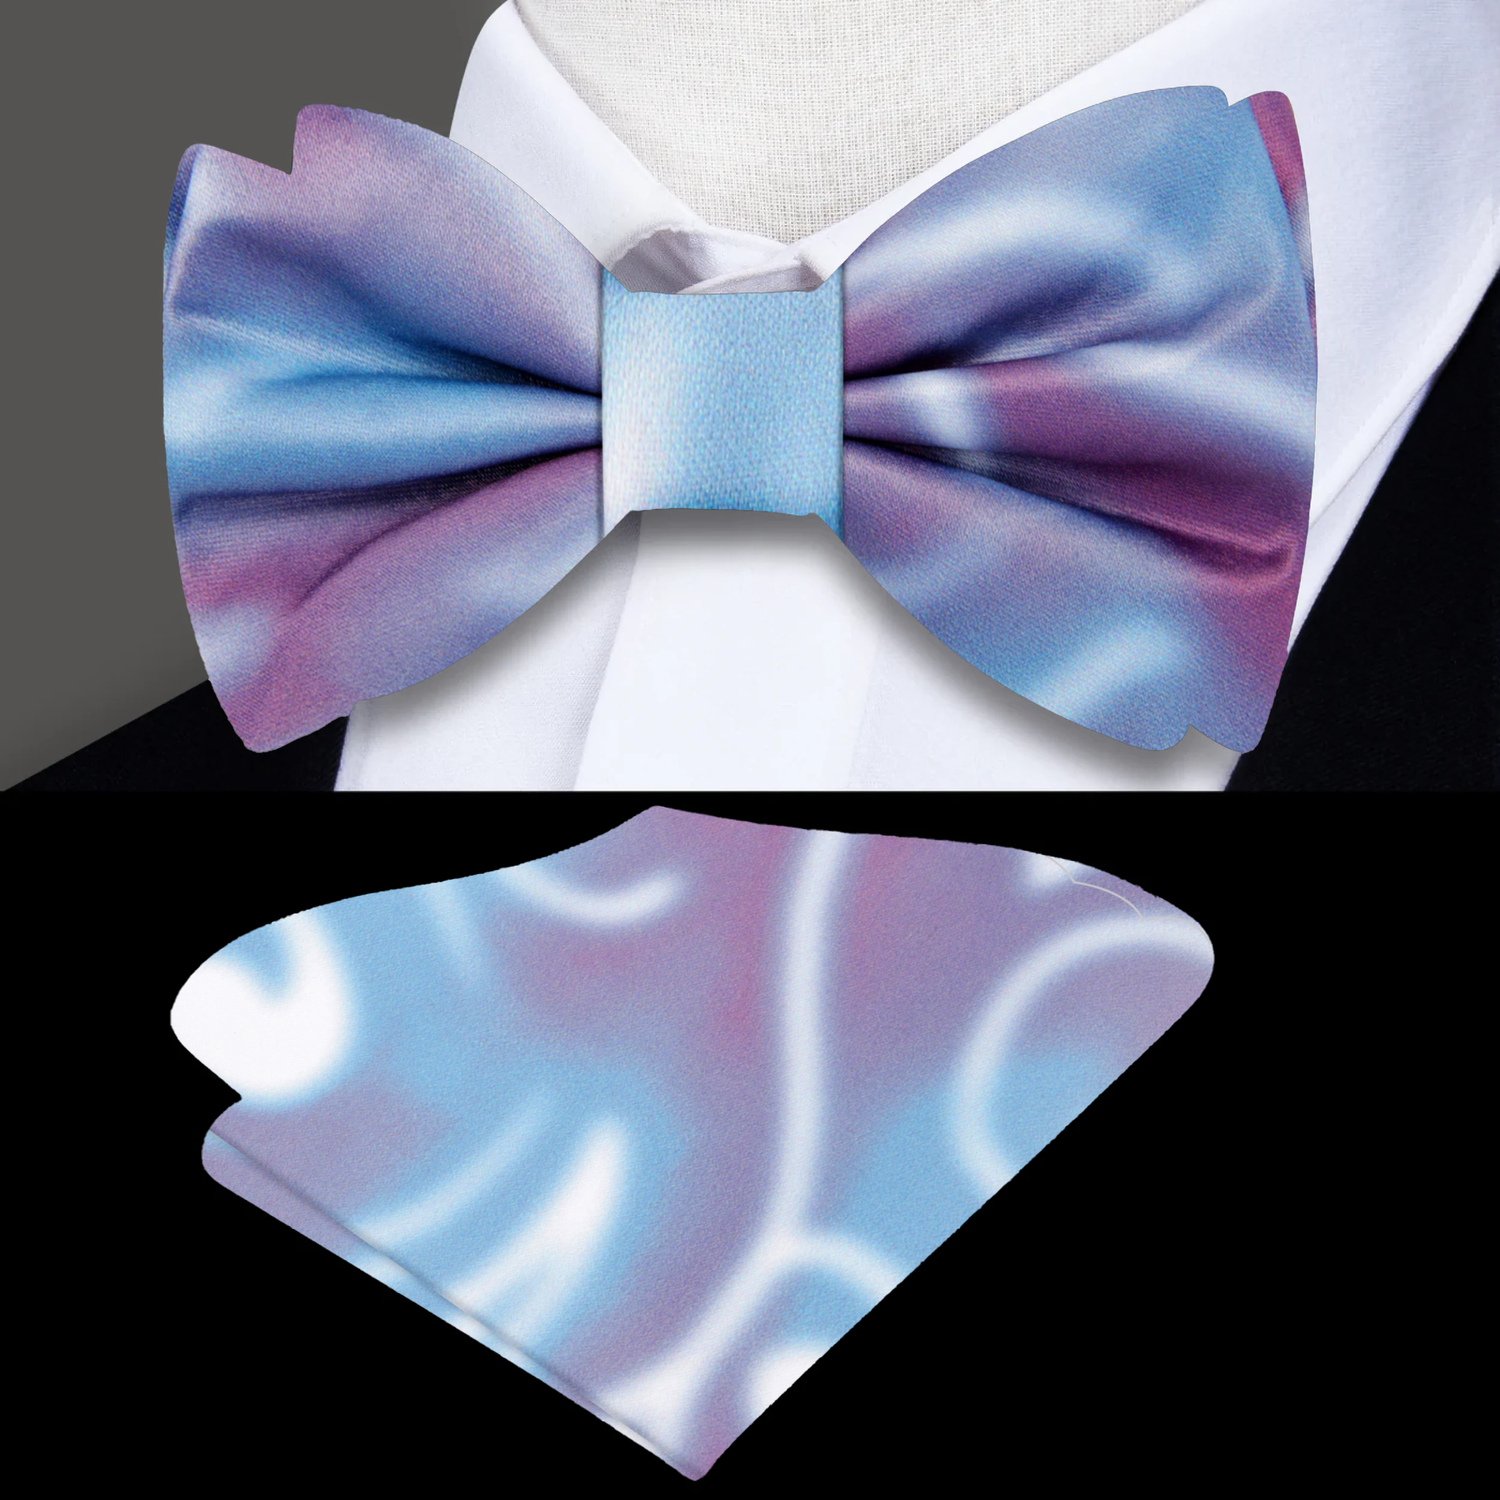 Shades of Purple, Blue, Pink abstract bow tie and square